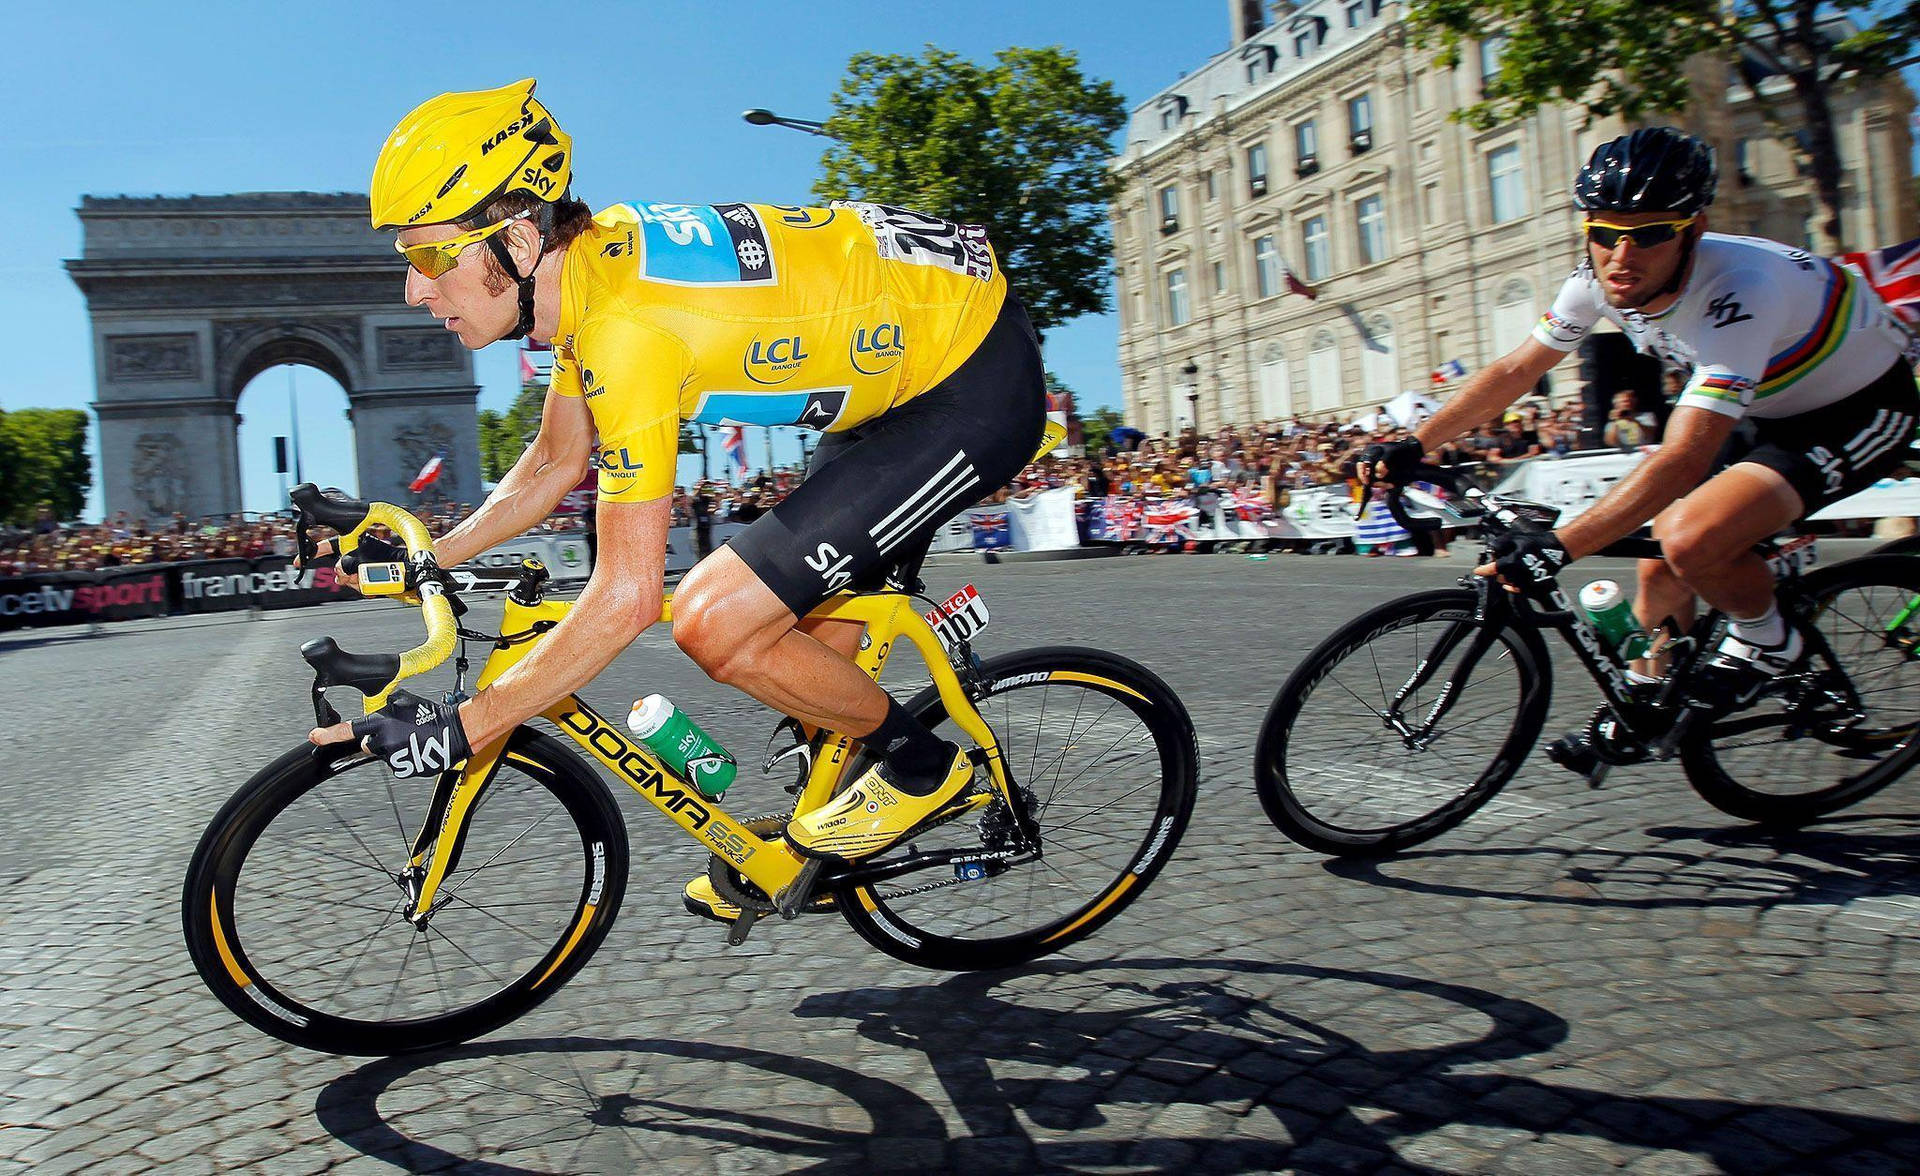 Bicycle Race In Tour De France Background